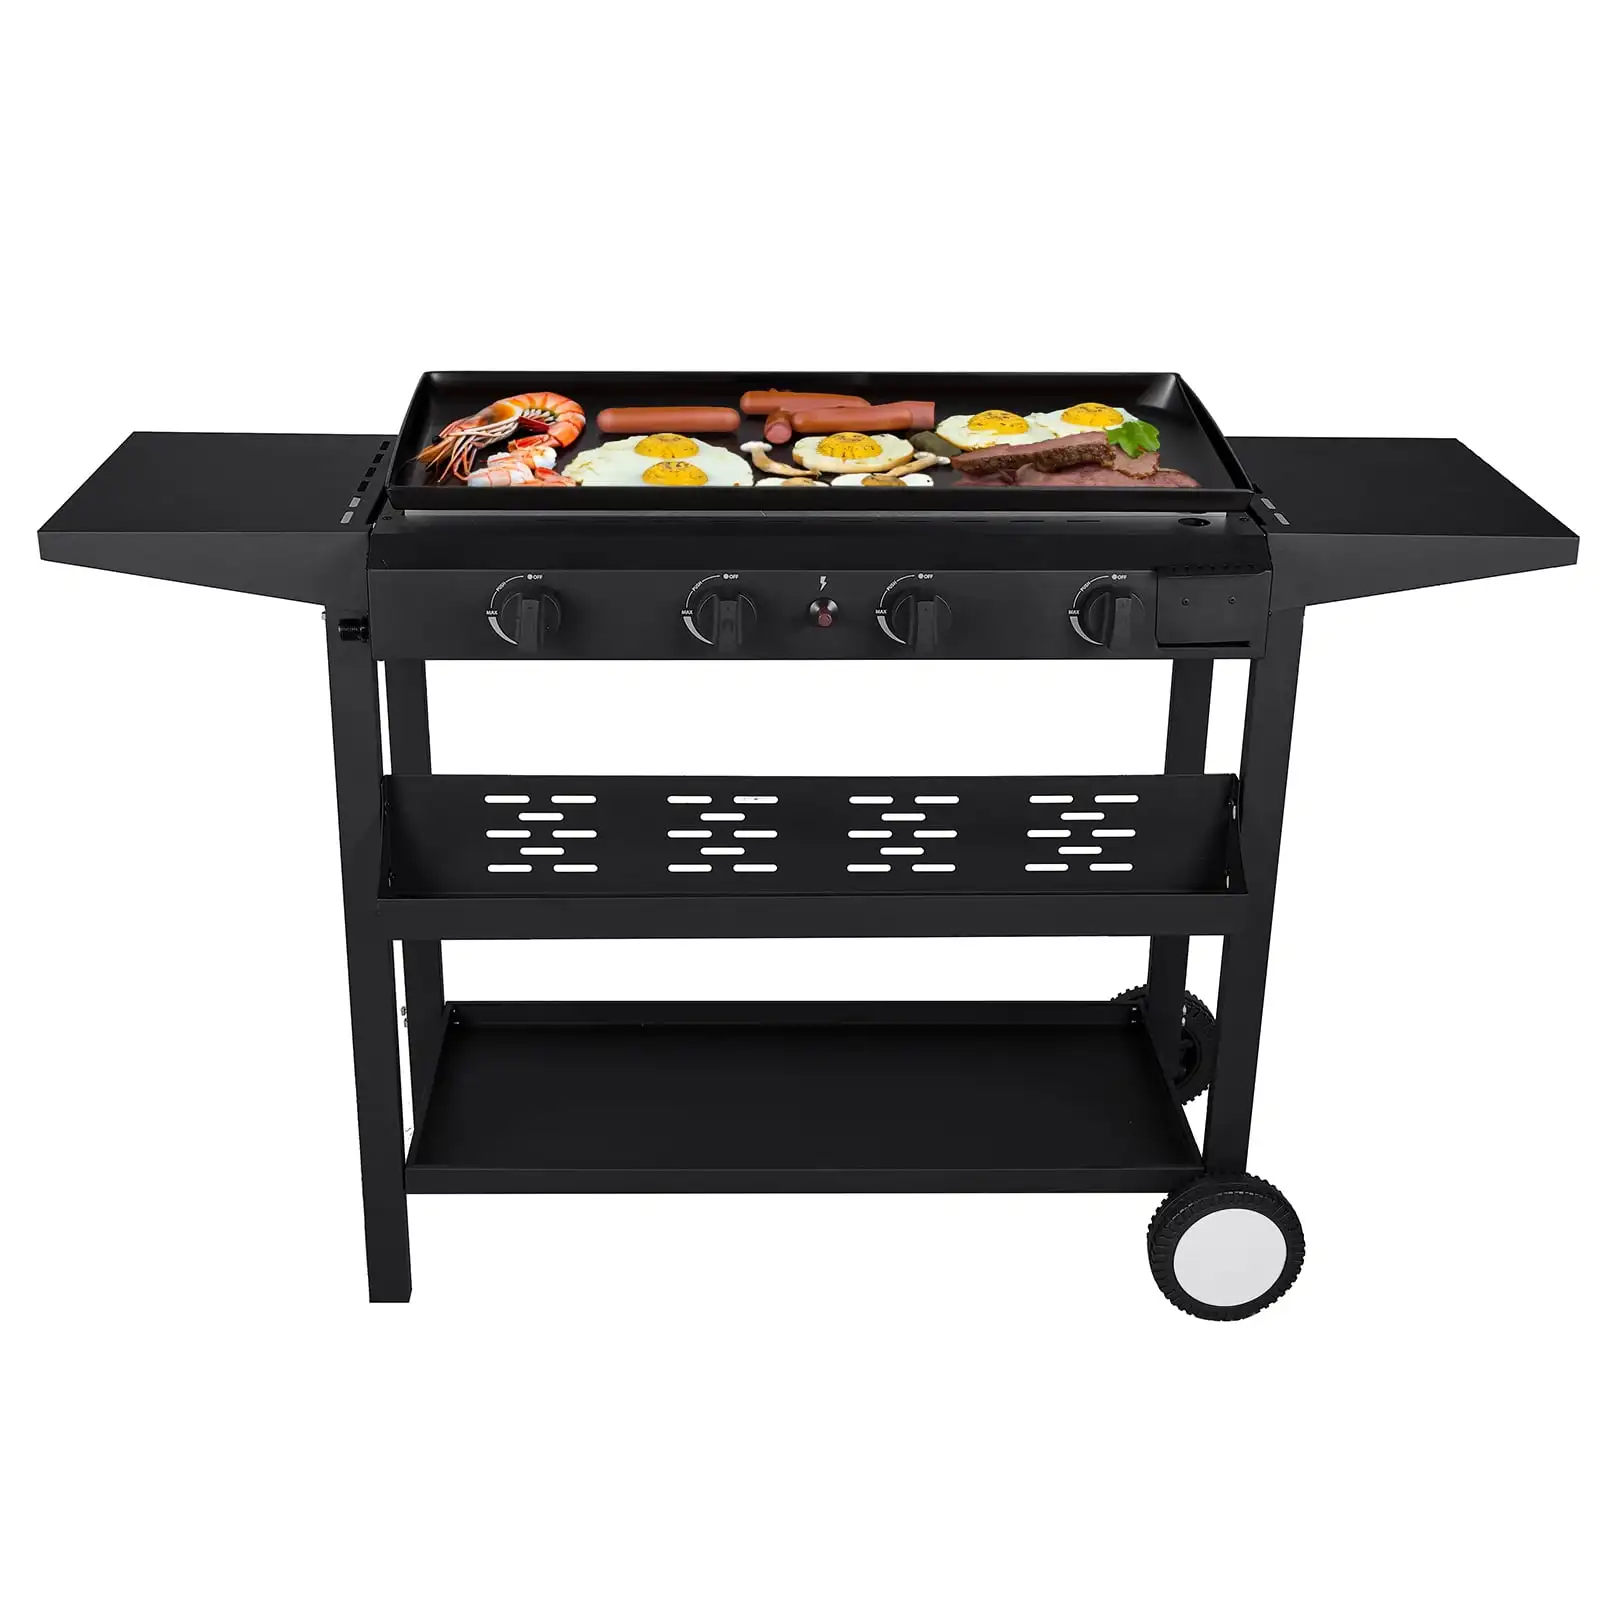 

GIVIMO 4 Burner Gas Griddle Portable Flat Table Top BBQ Grill Cooking Station